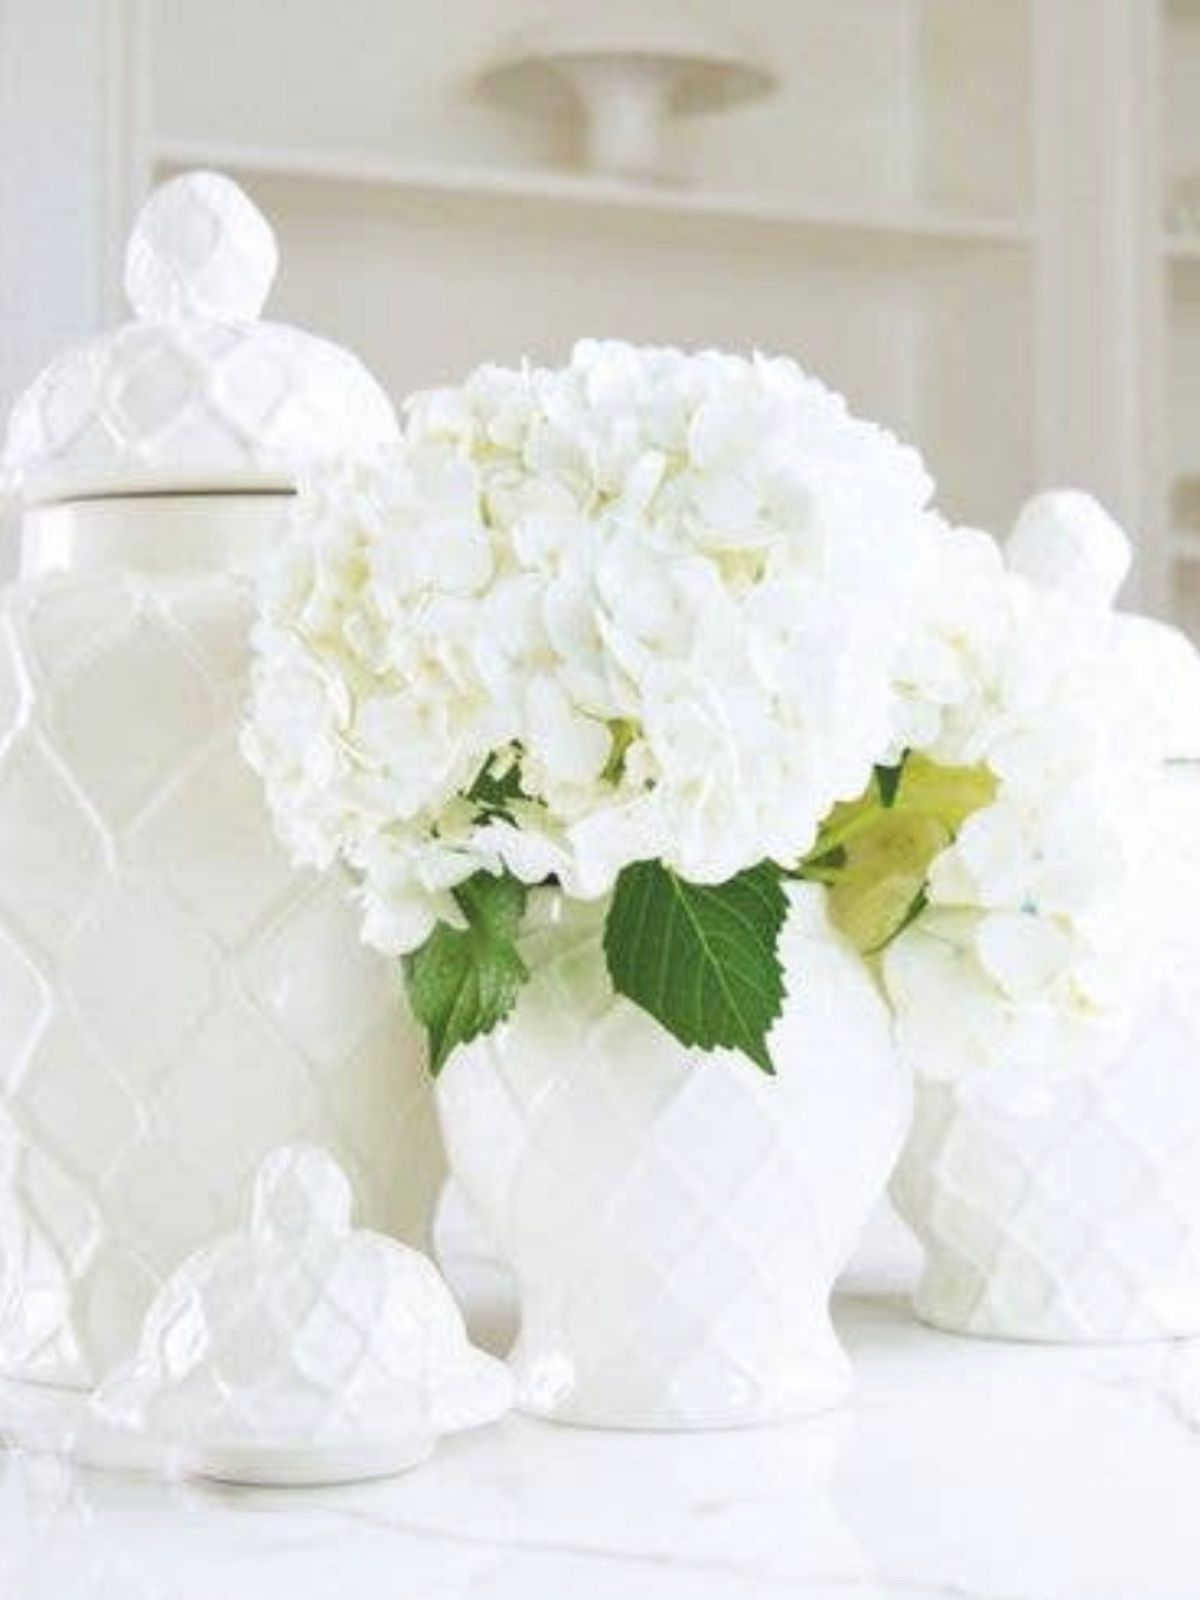 White Ceramic Ginger Jar with Roped Diamond Design Available in 3 Sizes Sold KYA Home Decor.